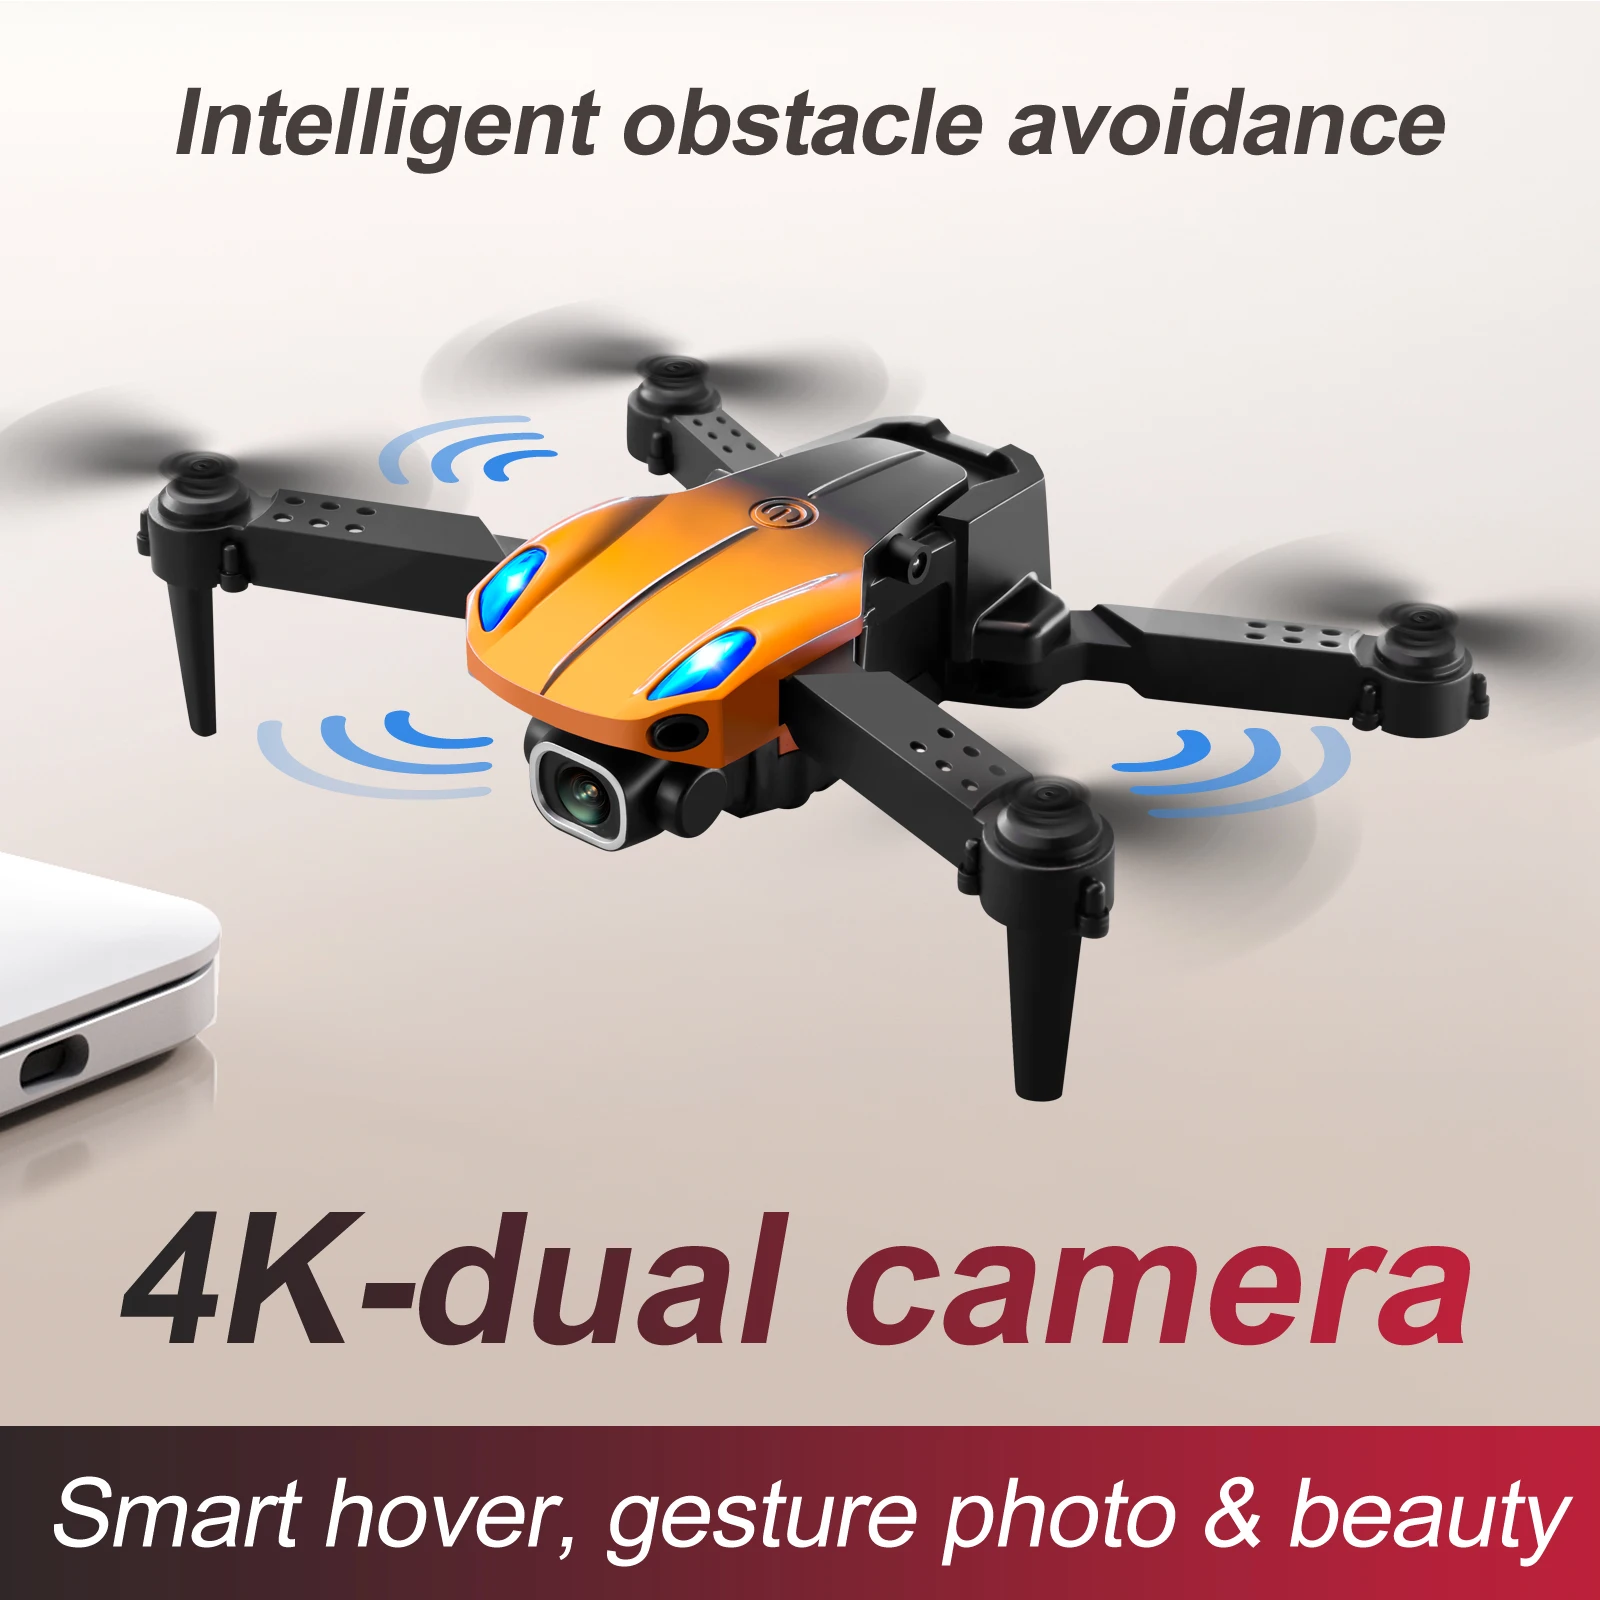 Drone 4k Professional Rc Quadcopter Remote Control Toy Plane HD Camera Rc Plane Dual Camera 360° Roll 50x Zoom Smart Hover